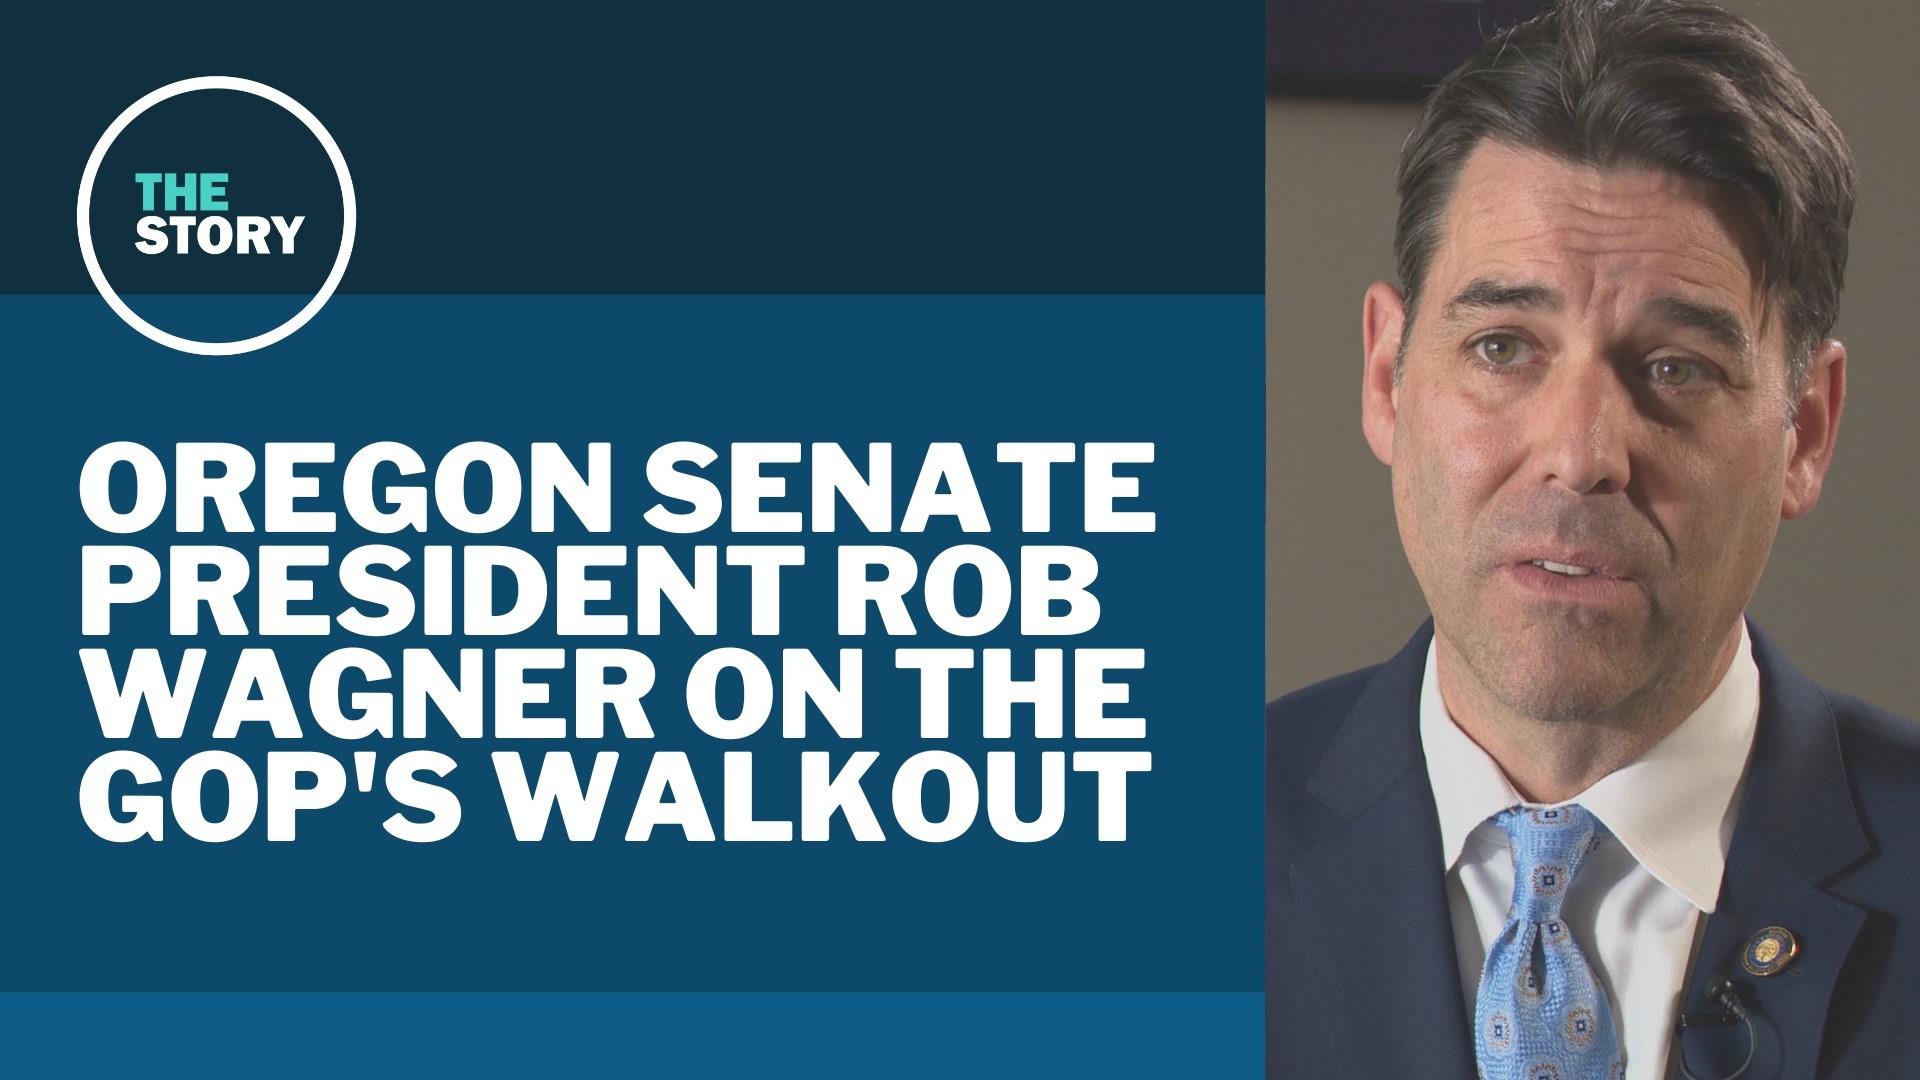 The Story sat down with Wagner to ask what it will take to end the walkout and bring Senate Republicans back to the floor.